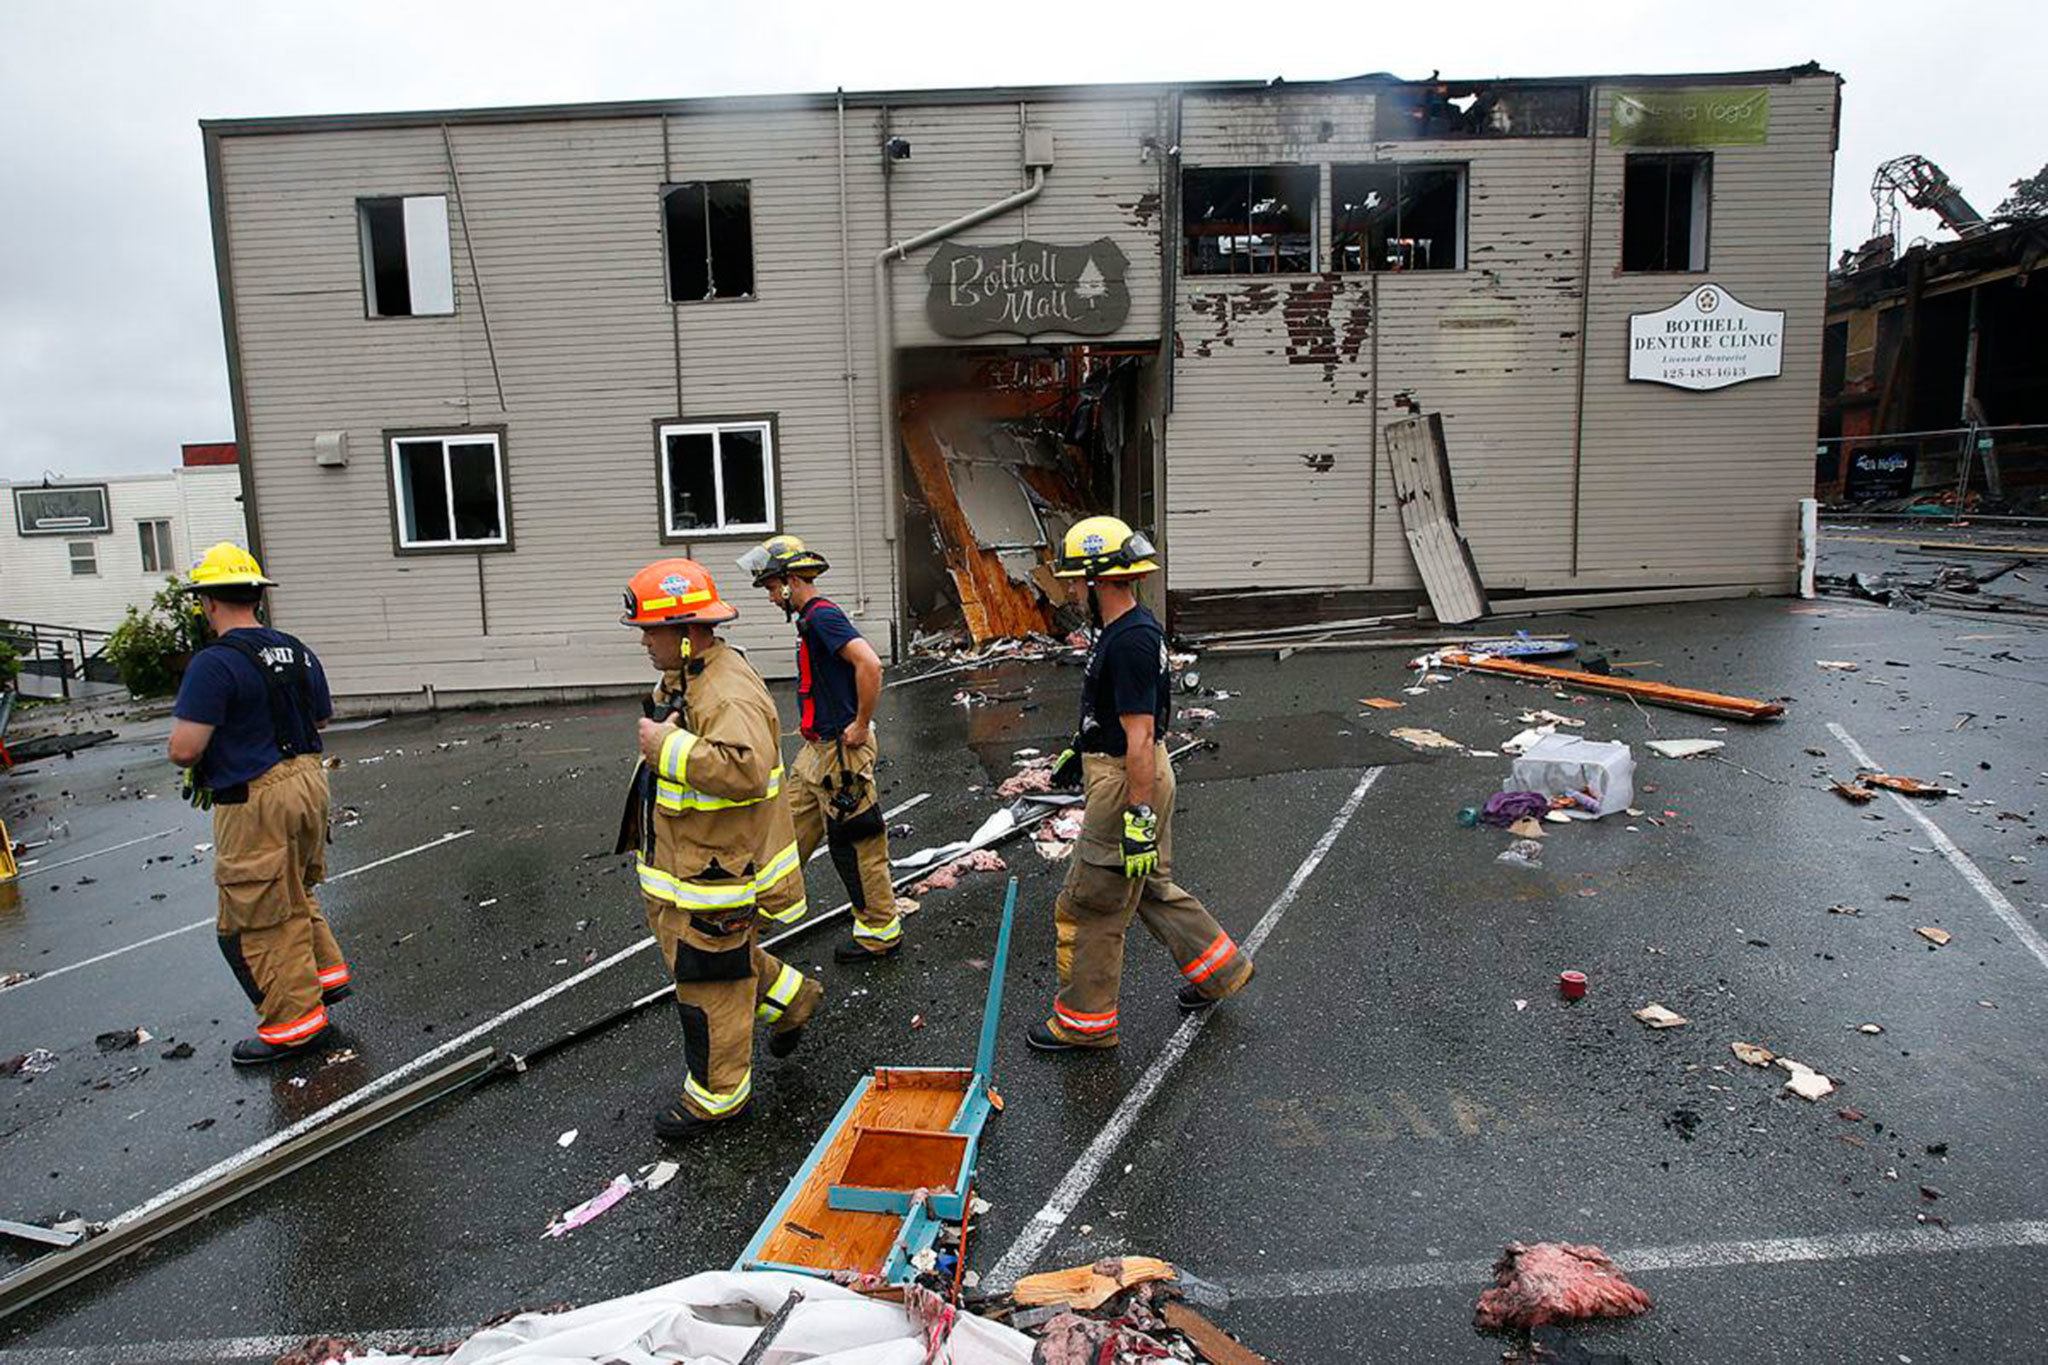 Firefighers pass by the entrance to the Bothell Mall following a fire on July 22. IAN TERRY/The Herald